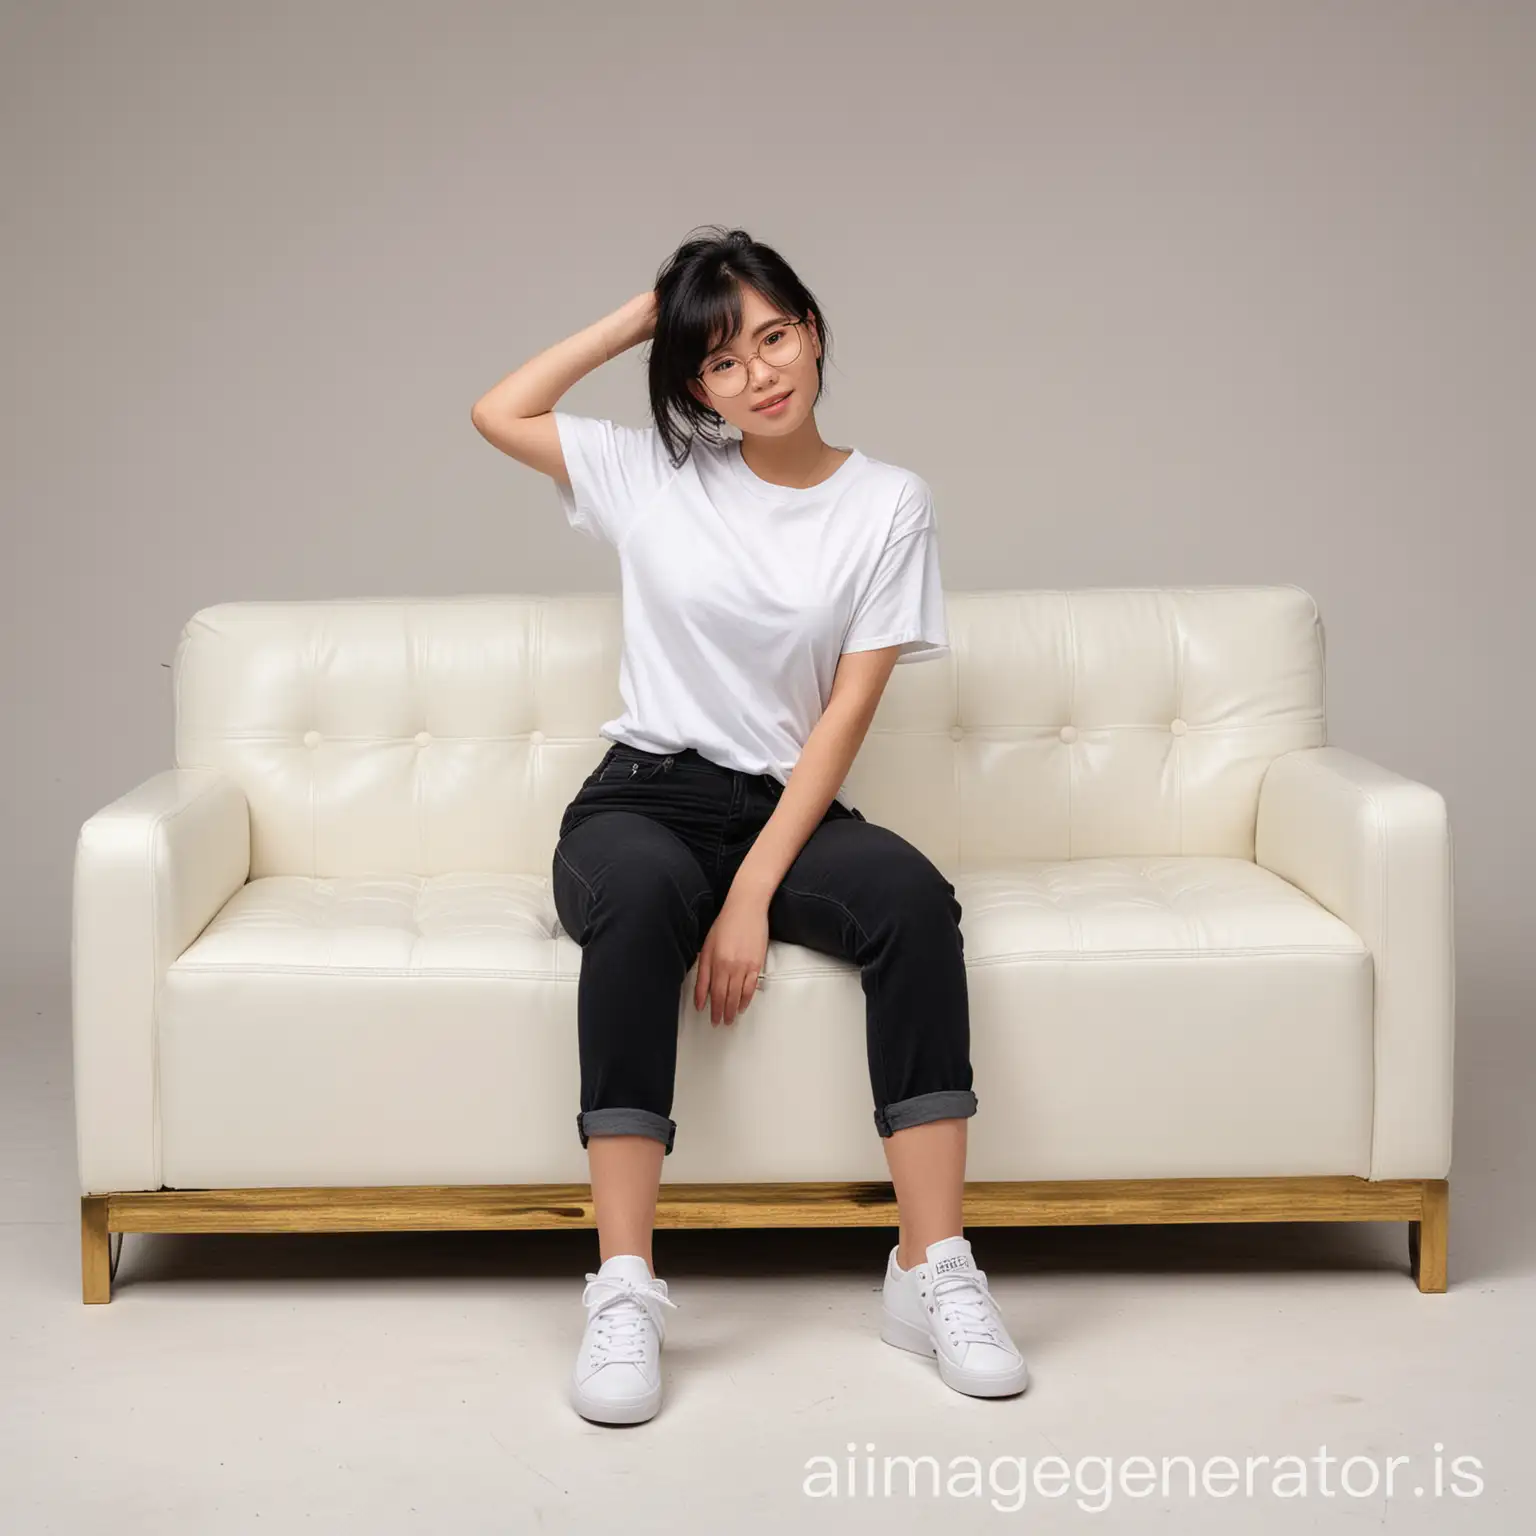 Cantonese-Girl-in-Stylish-Monochrome-Outfit-Relaxing-on-Sofa